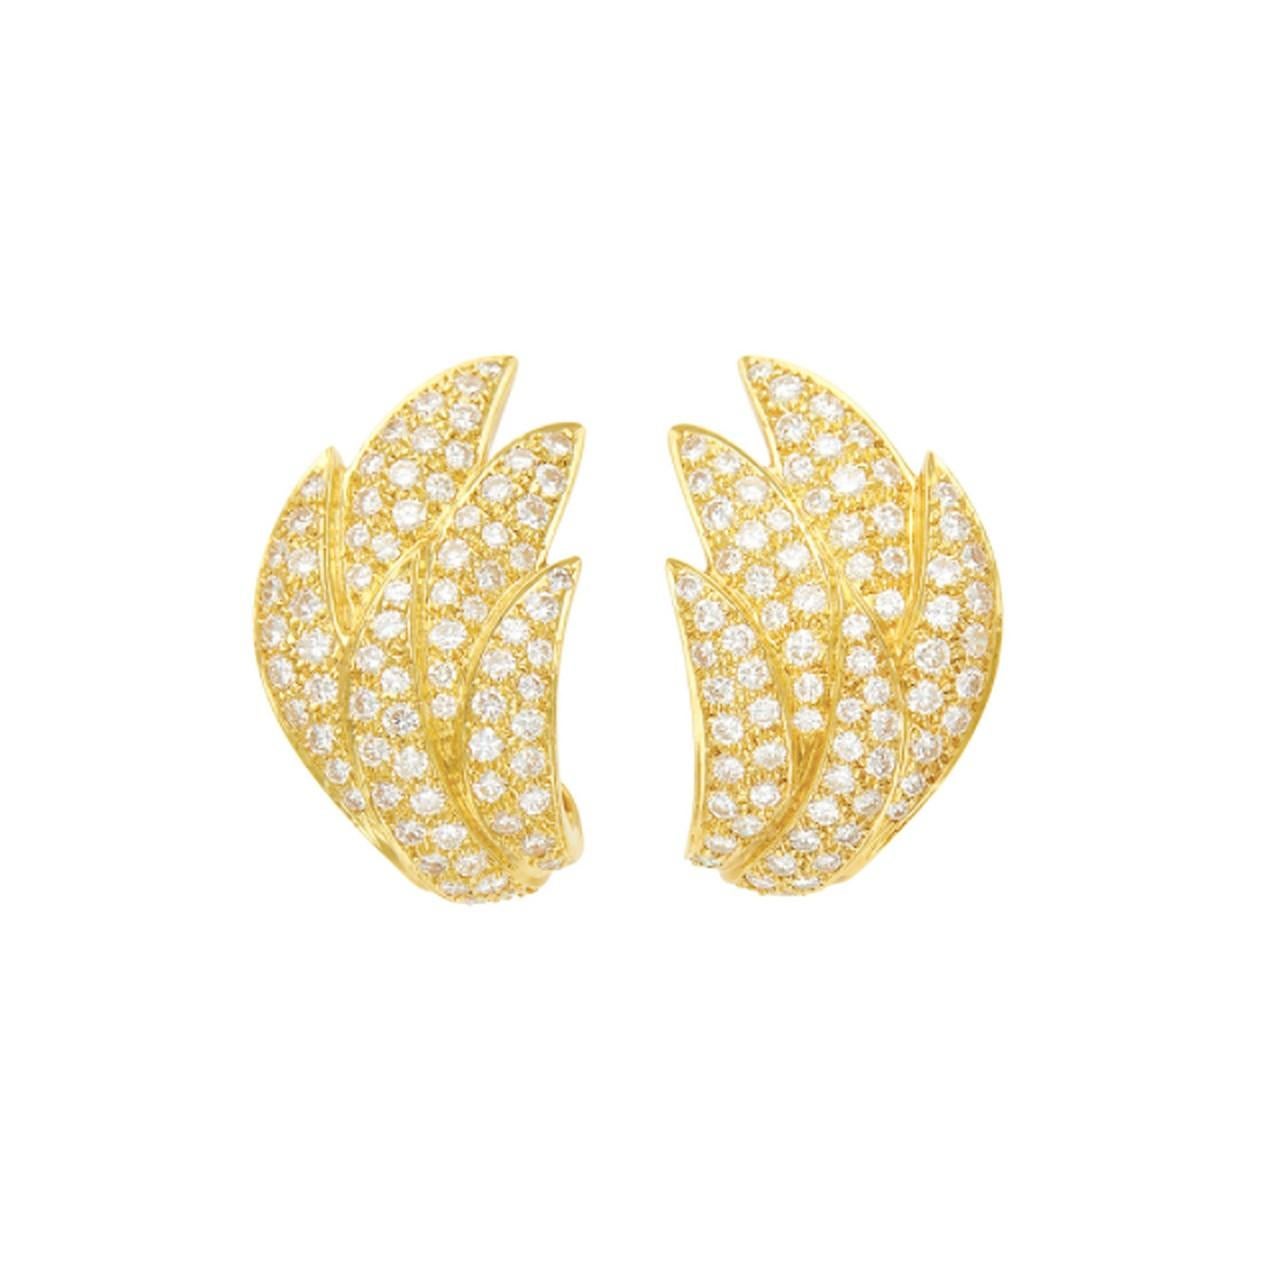 An elegant pair of pavé diamond earrings crafted in 18k yellow gold with foliate design. Made in America, circa 1980.